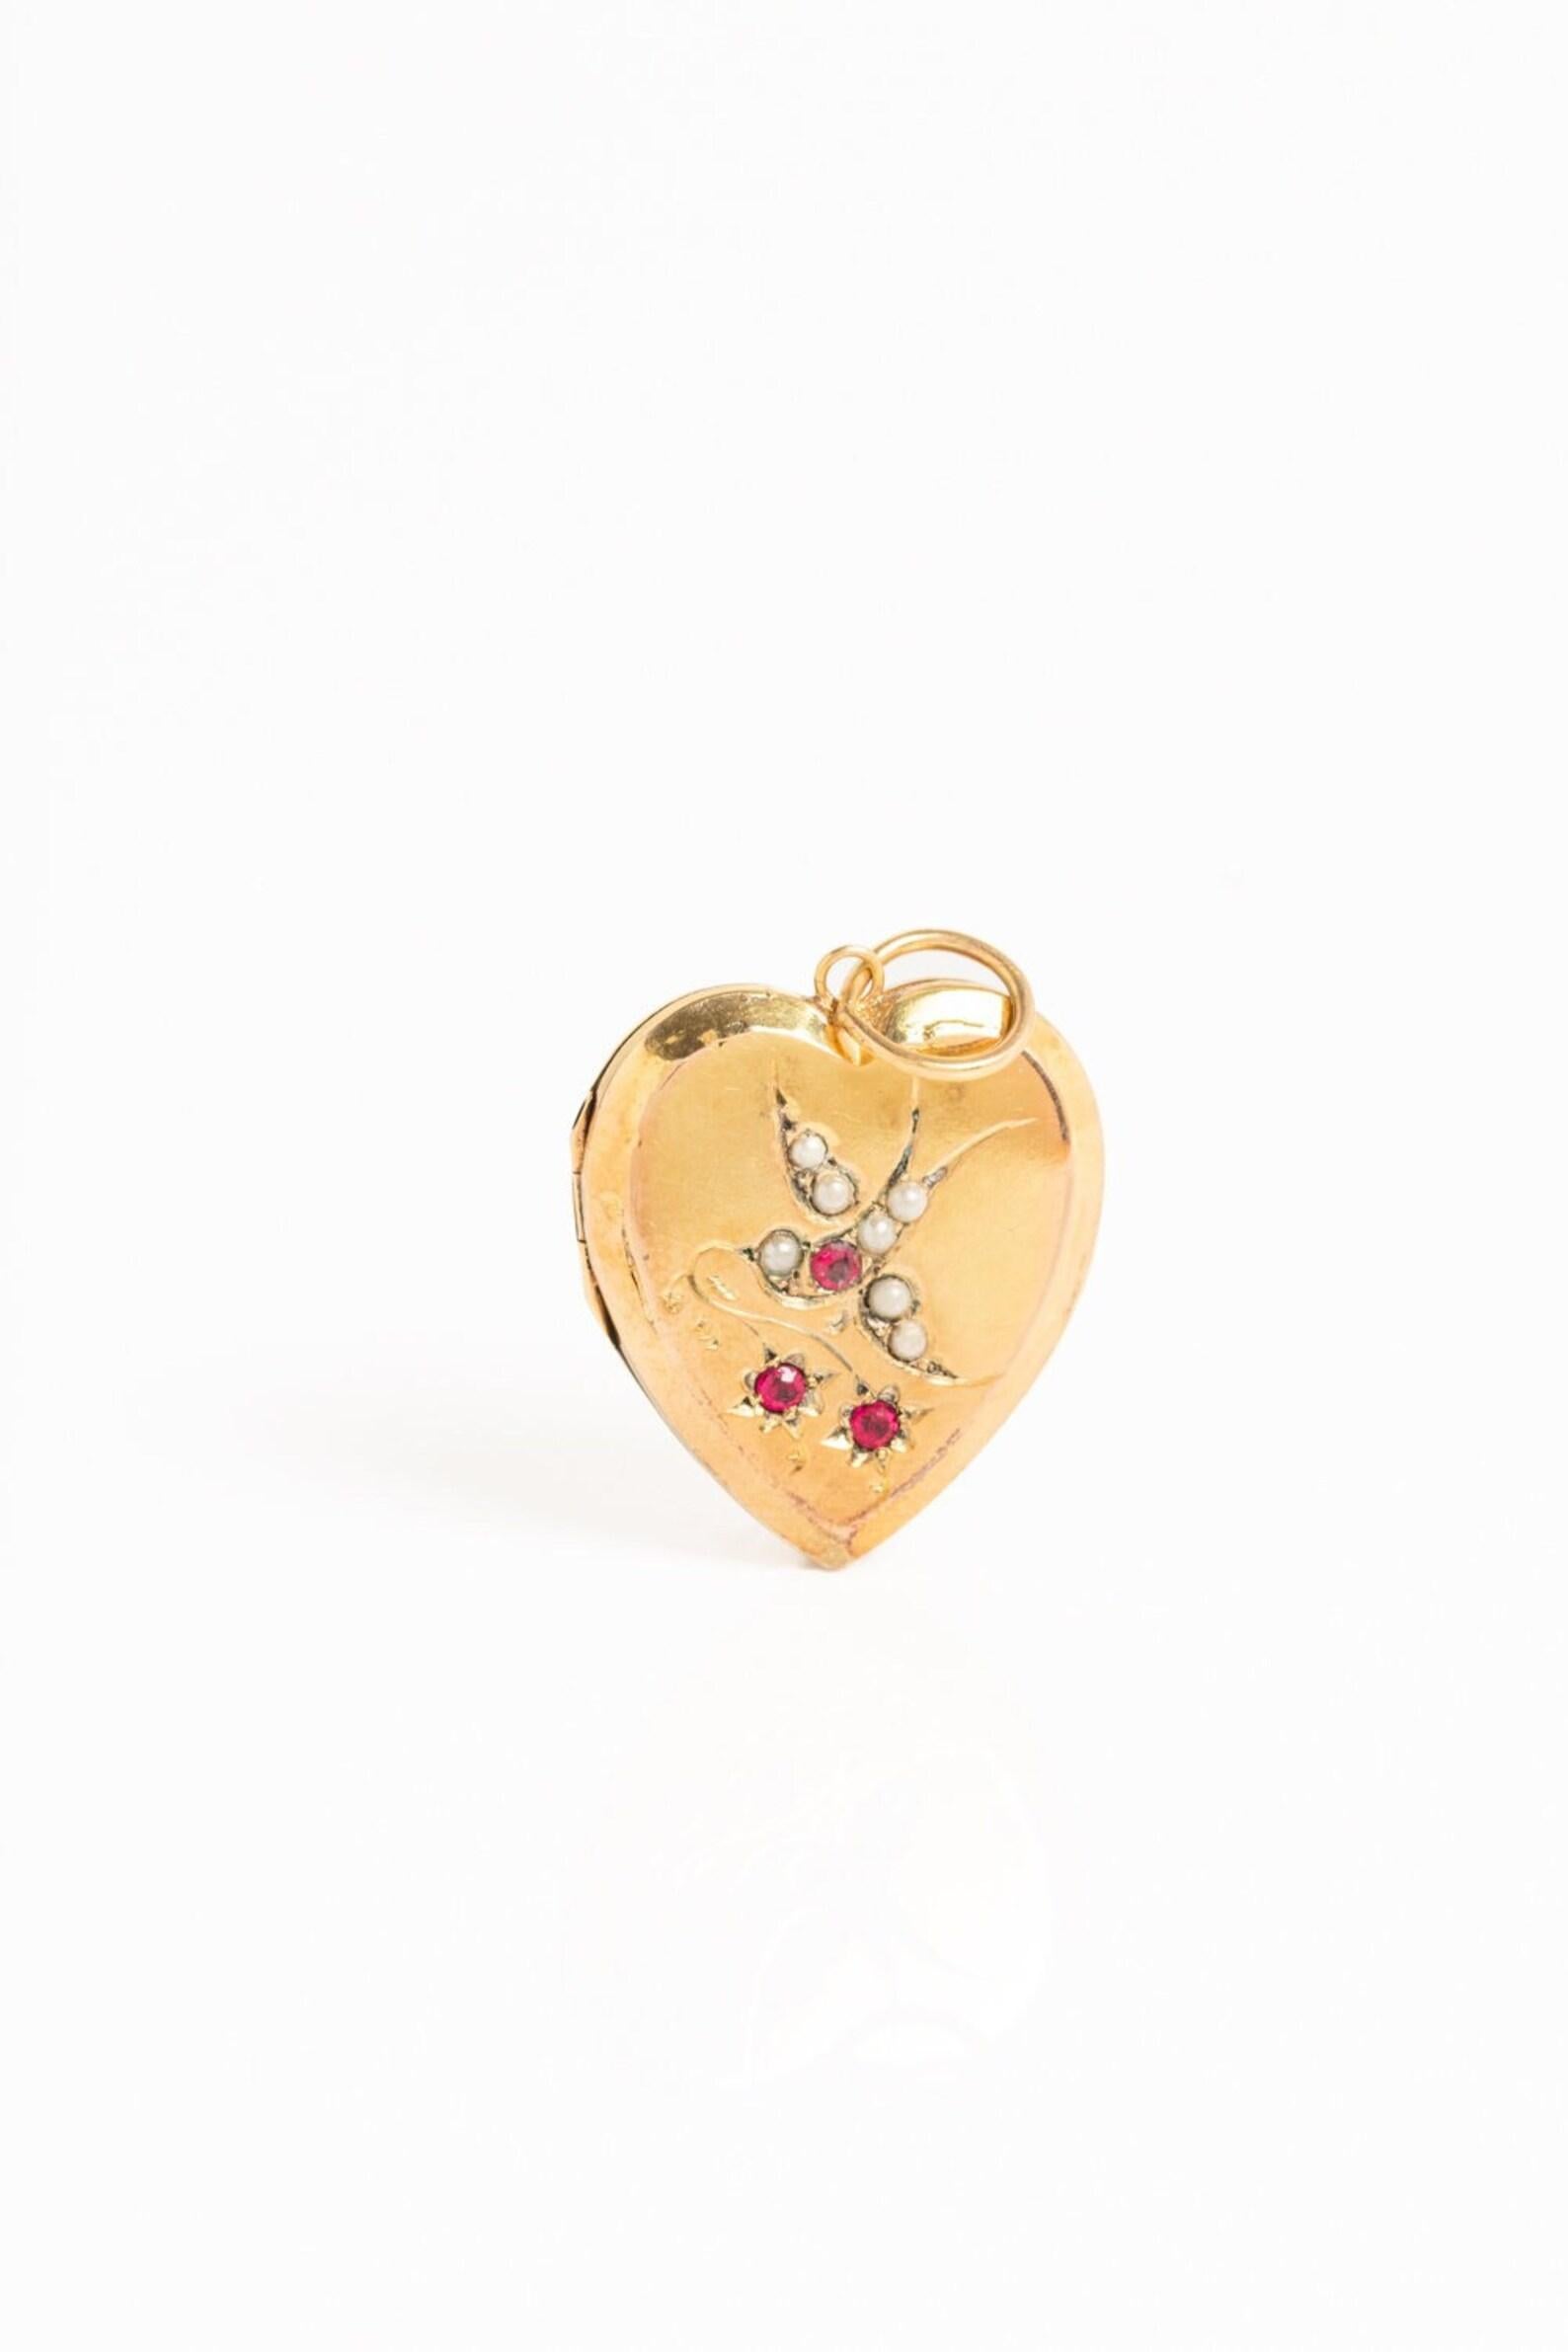 Women's  Victorian 9ct Front and Back Gold Heart Locket With Pearls and Rubies